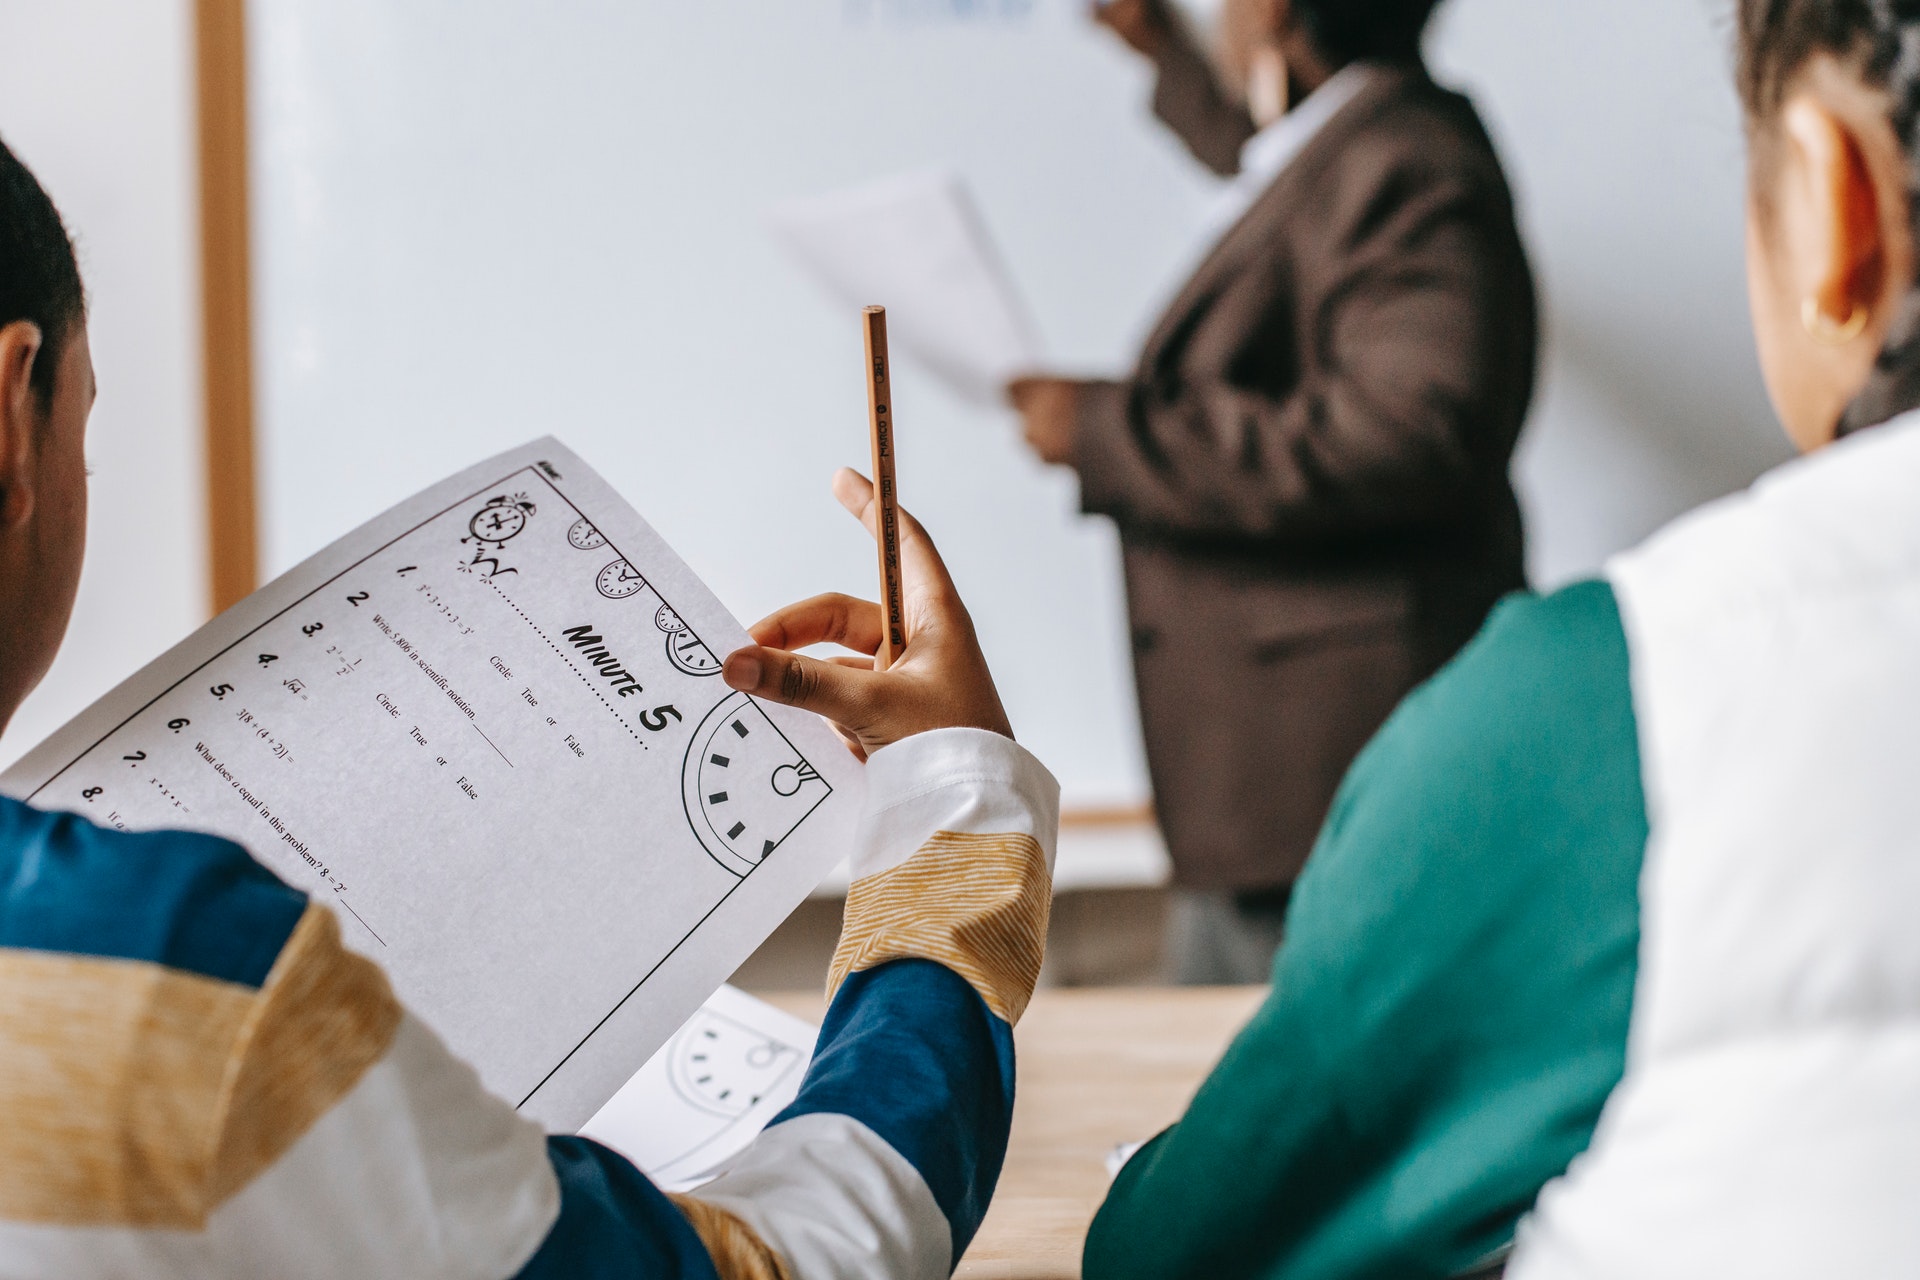 Teachers and student in class. Image: Pexels